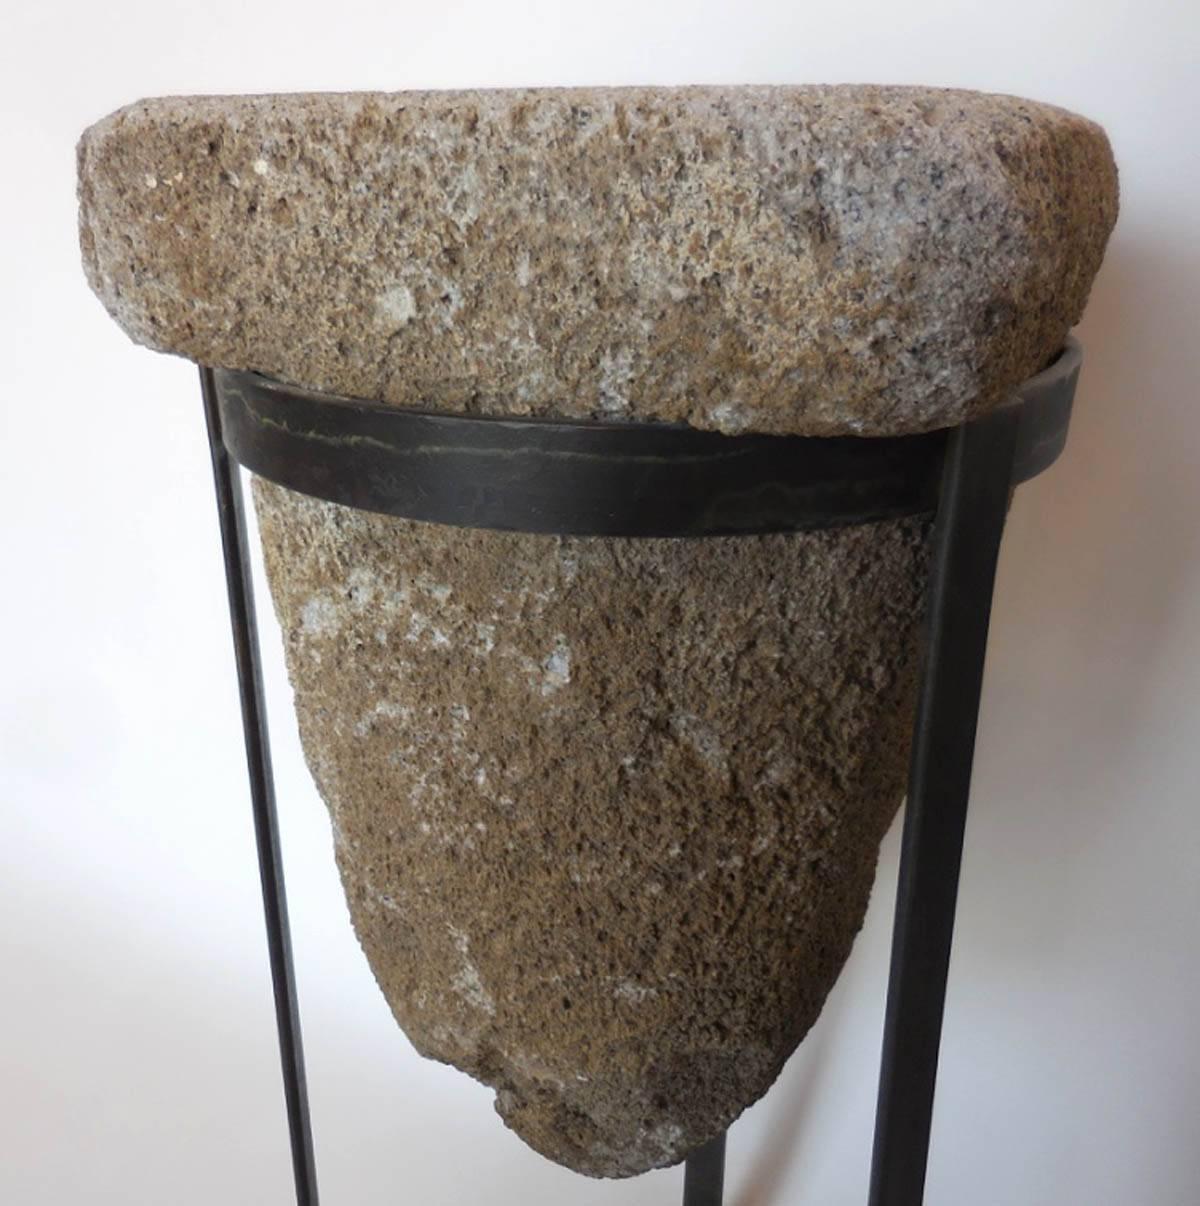 water filter stone